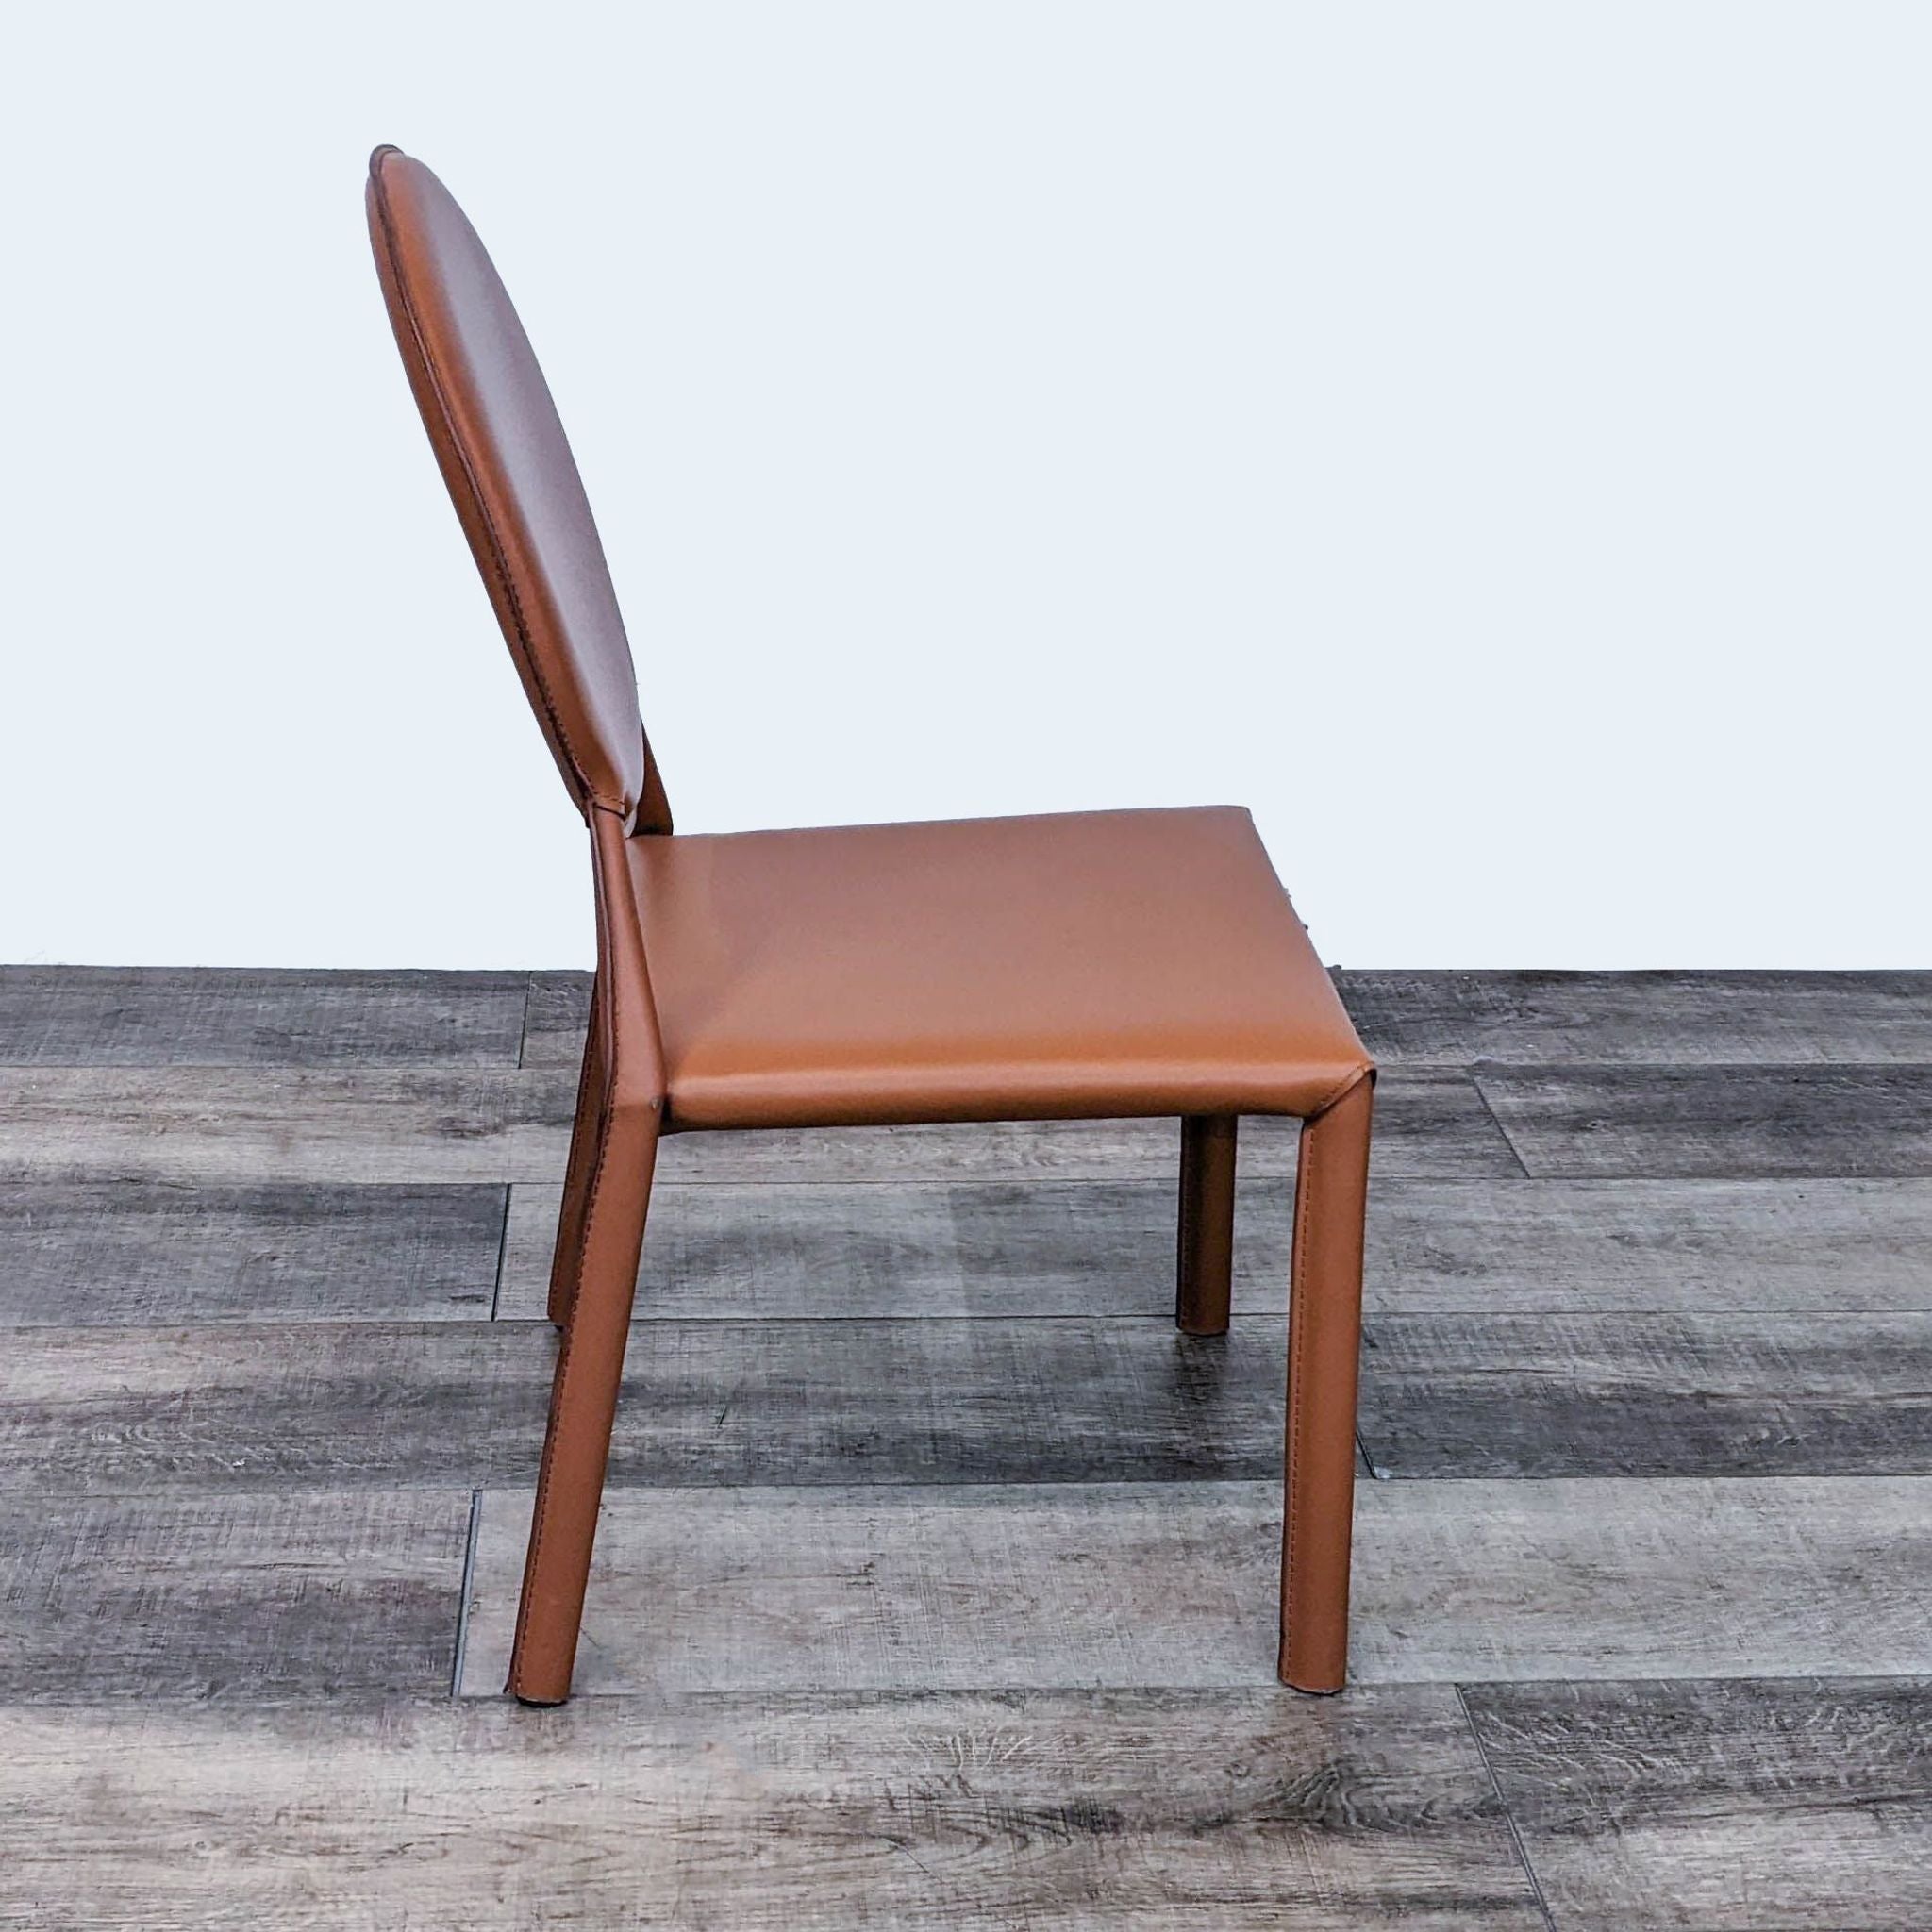 Alt text 2: Side view of the Euro Style Isabella stackable dining chair, displaying the sleek cognac leather and steel frame construction.